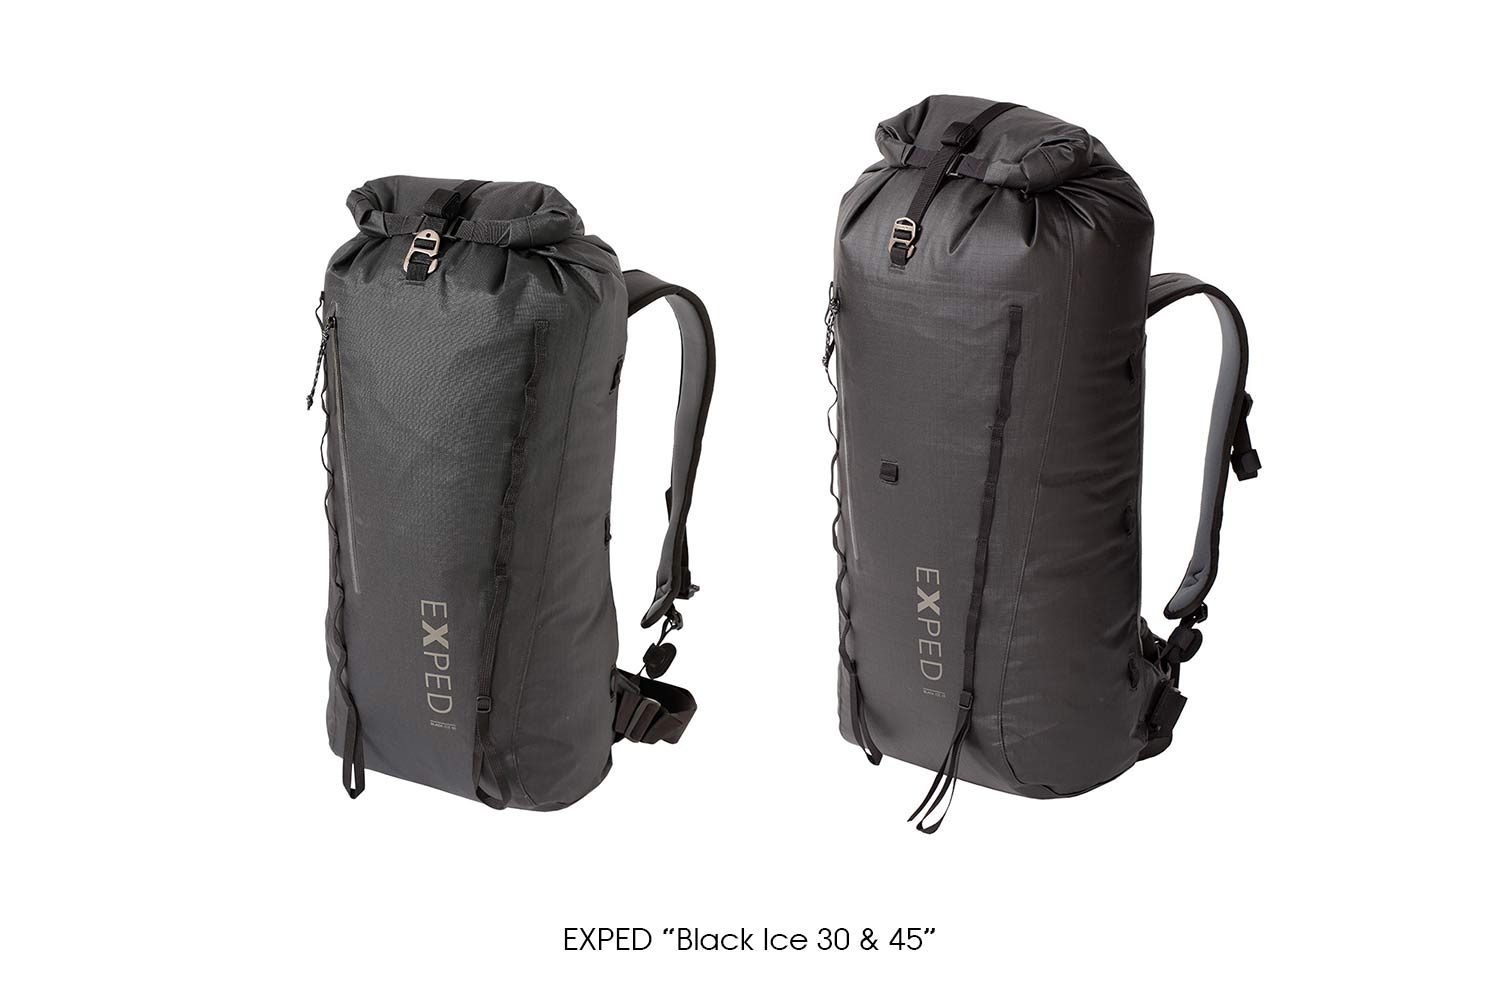 EXPED "BlackIce 30 & 45"